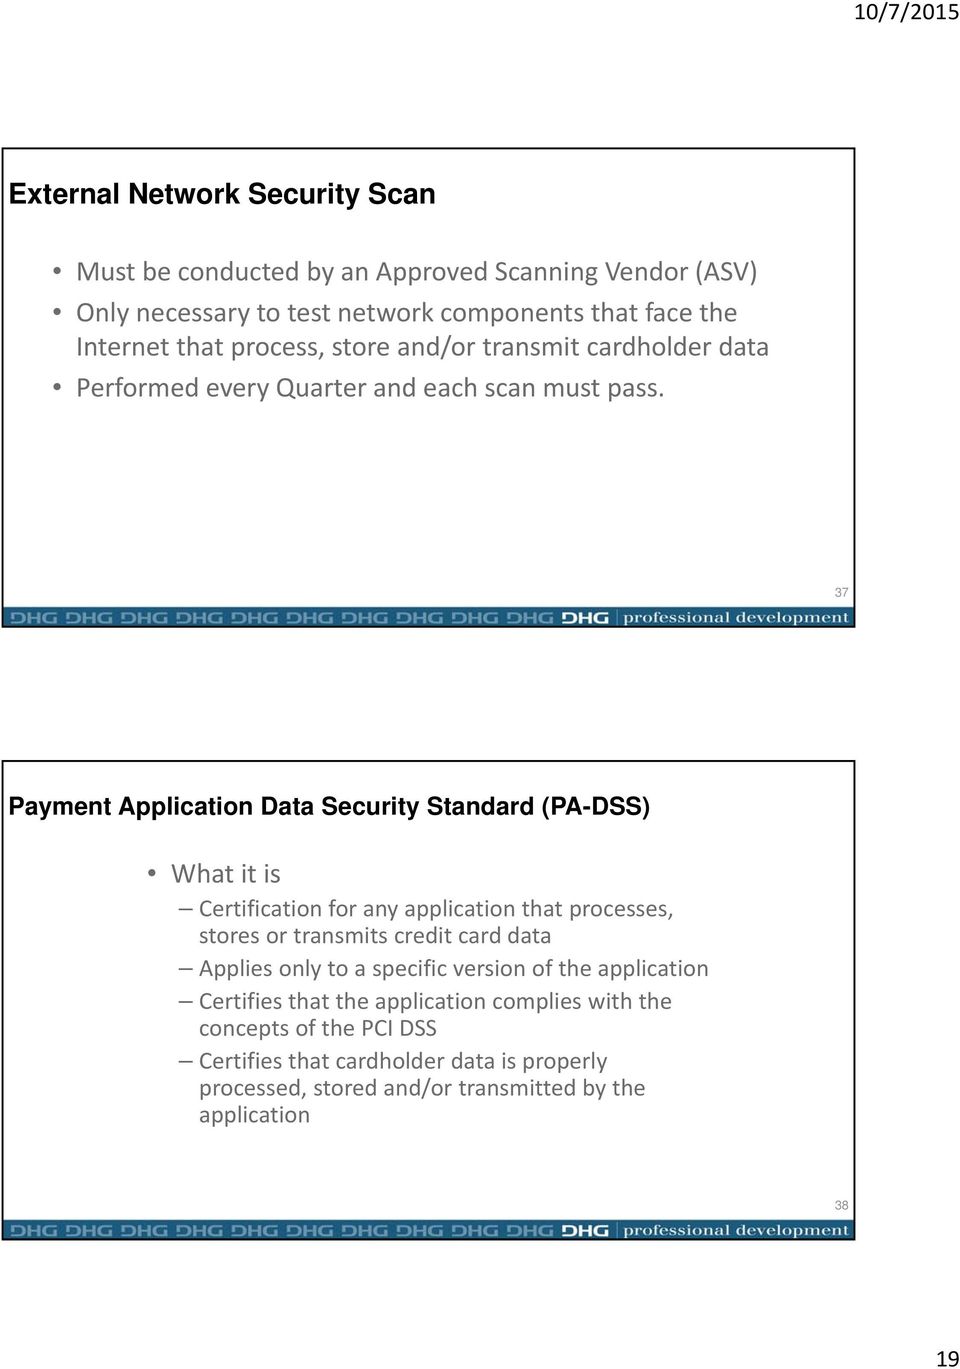 37 Payment Application Data Security Standard (PA-DSS) What it is Certification for any application that processes, stores or transmits credit card data Applies